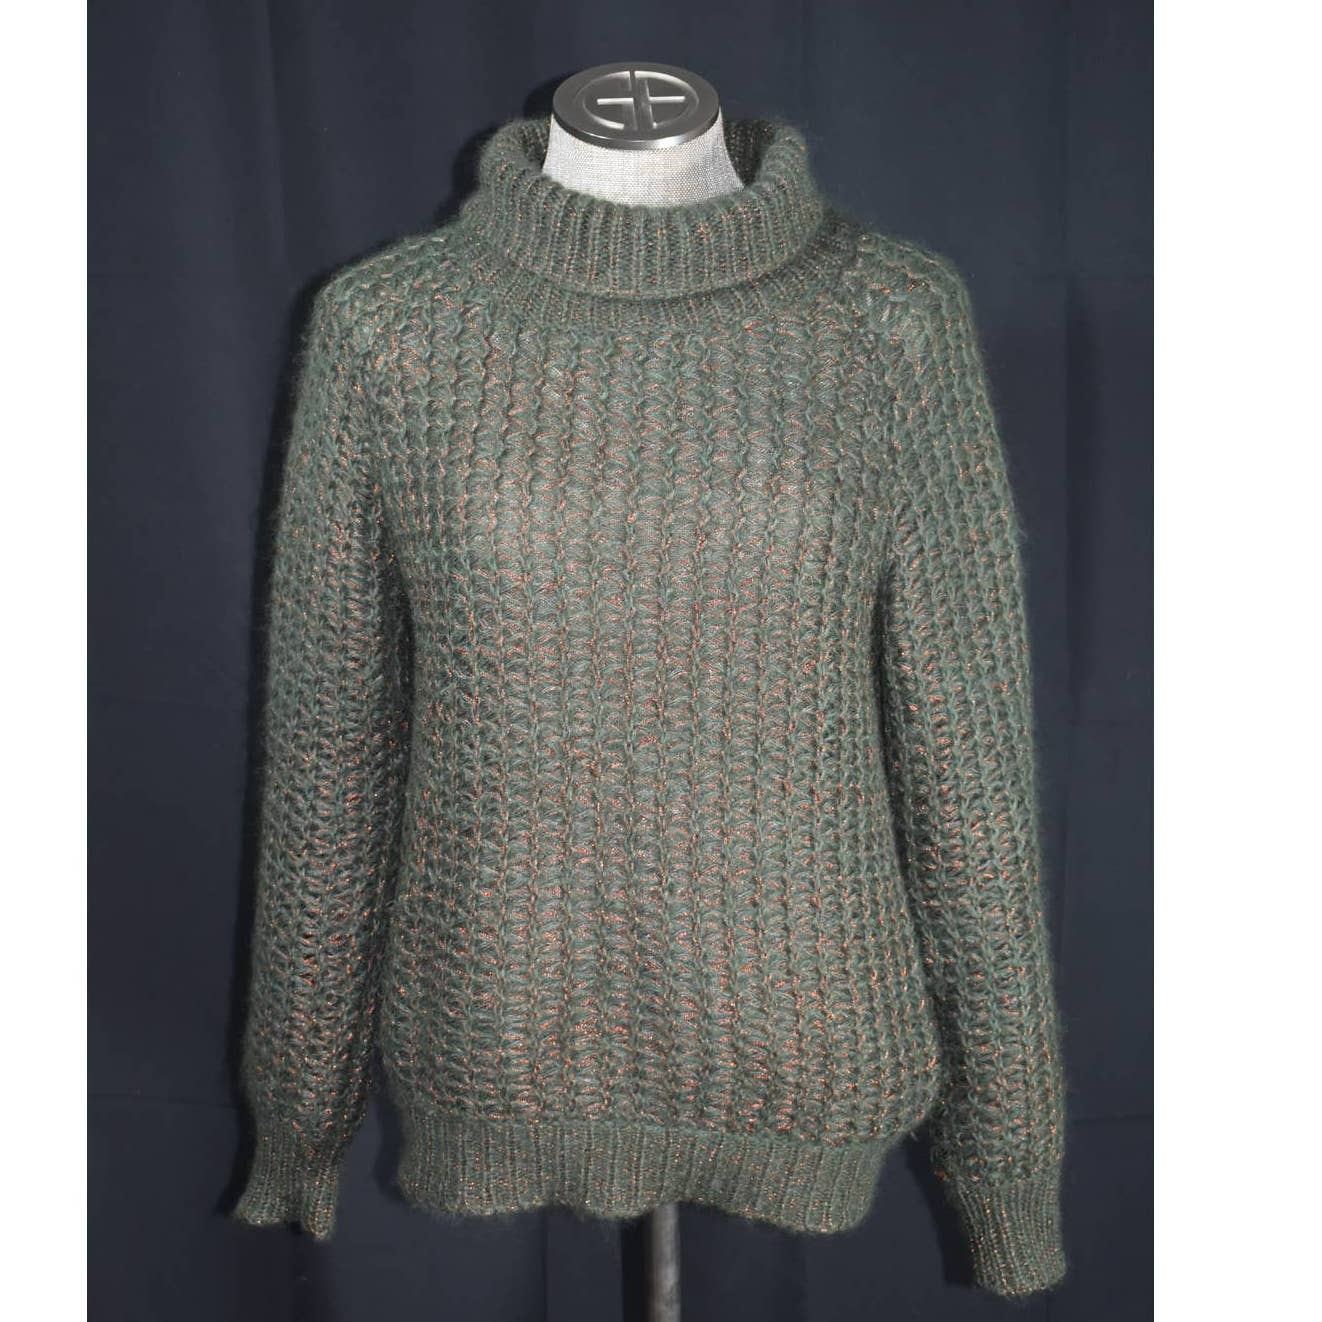 Vintage Theodore Turtleneck Green and Copper Knit Sweater - 42 / Medium